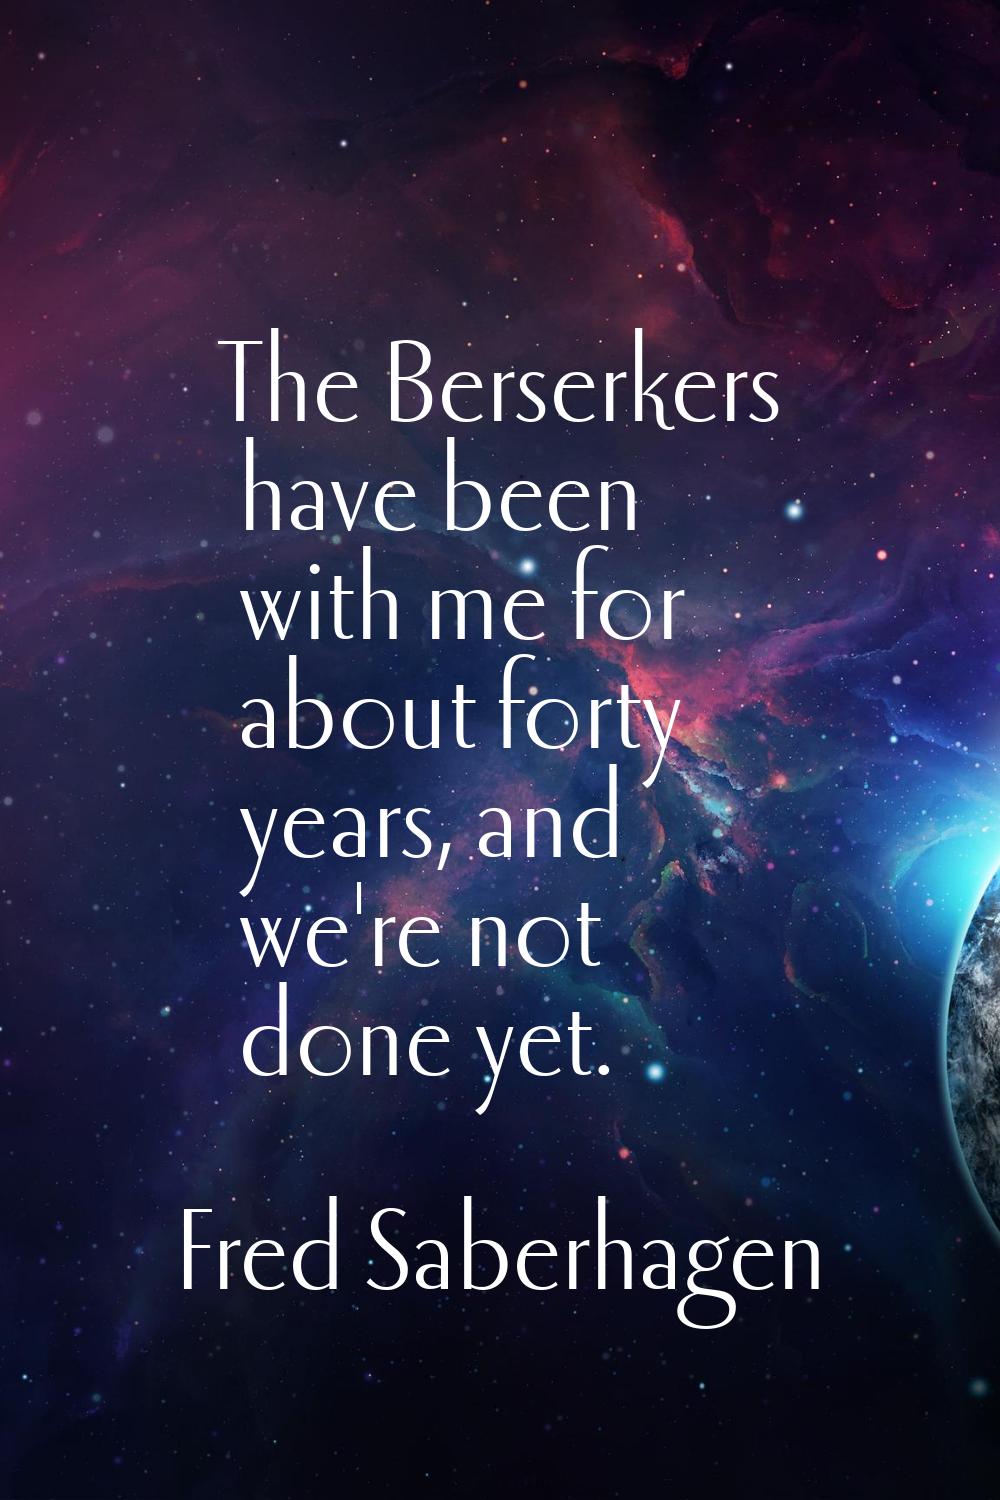 The Berserkers have been with me for about forty years, and we're not done yet.